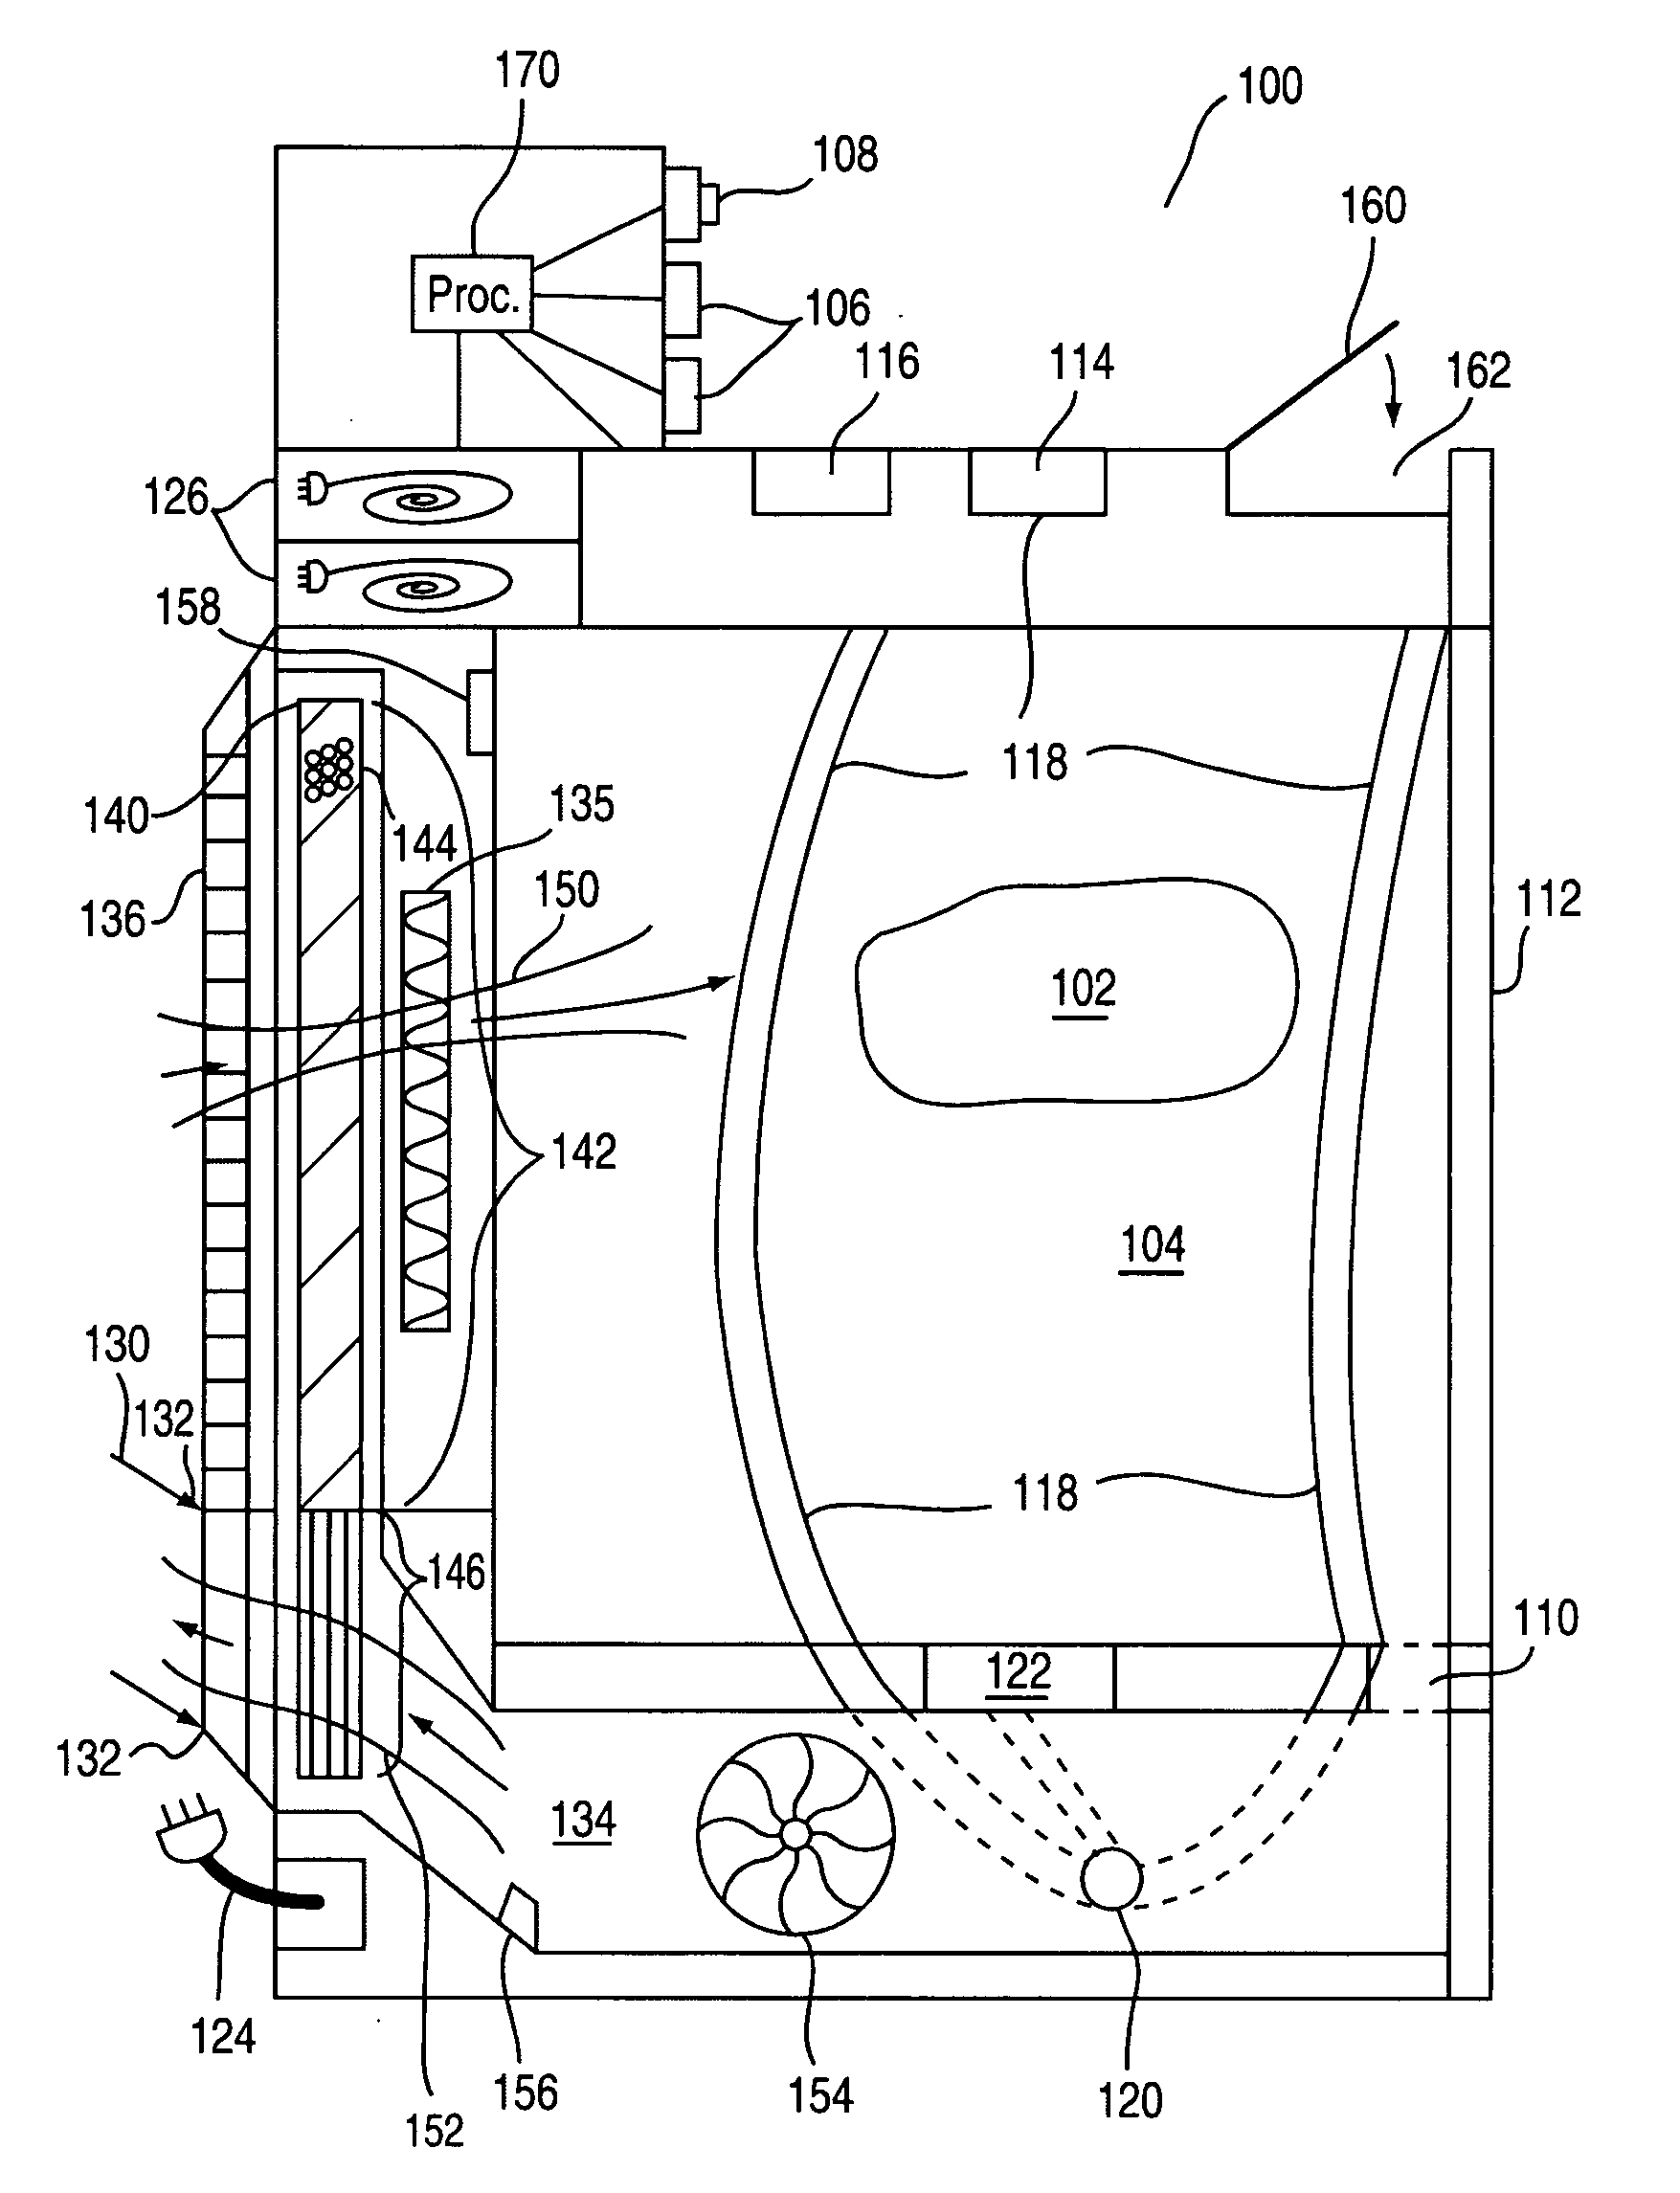 Dryer and drying apparatus with enhanced moisture removal